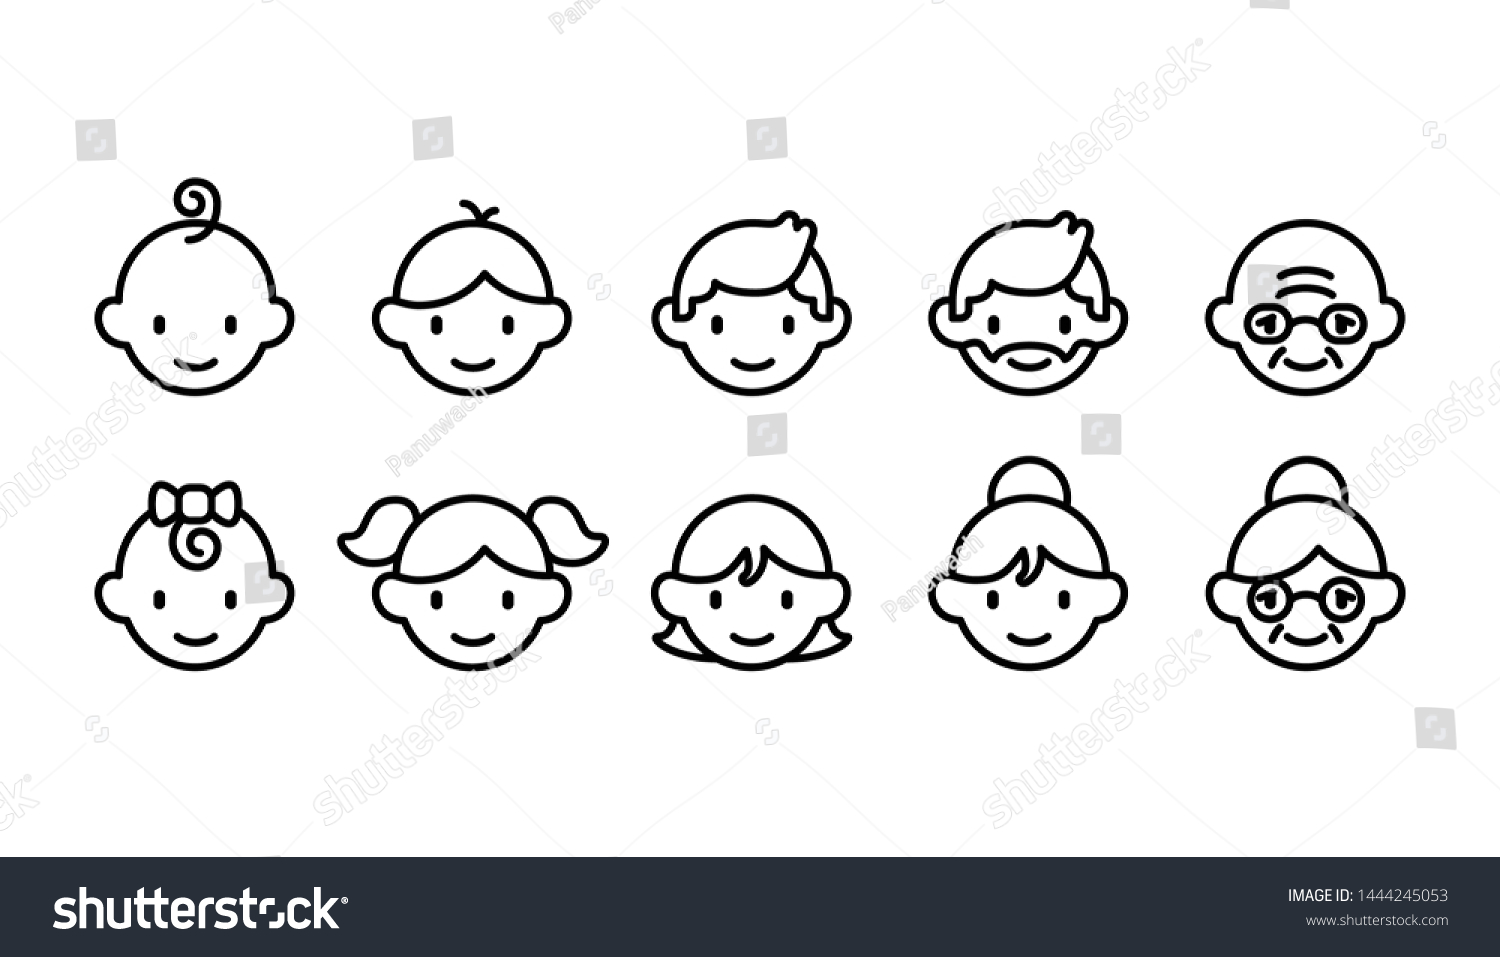 Icon set of different age groups of people from baby to elder (Cute simple art style)  #1444245053